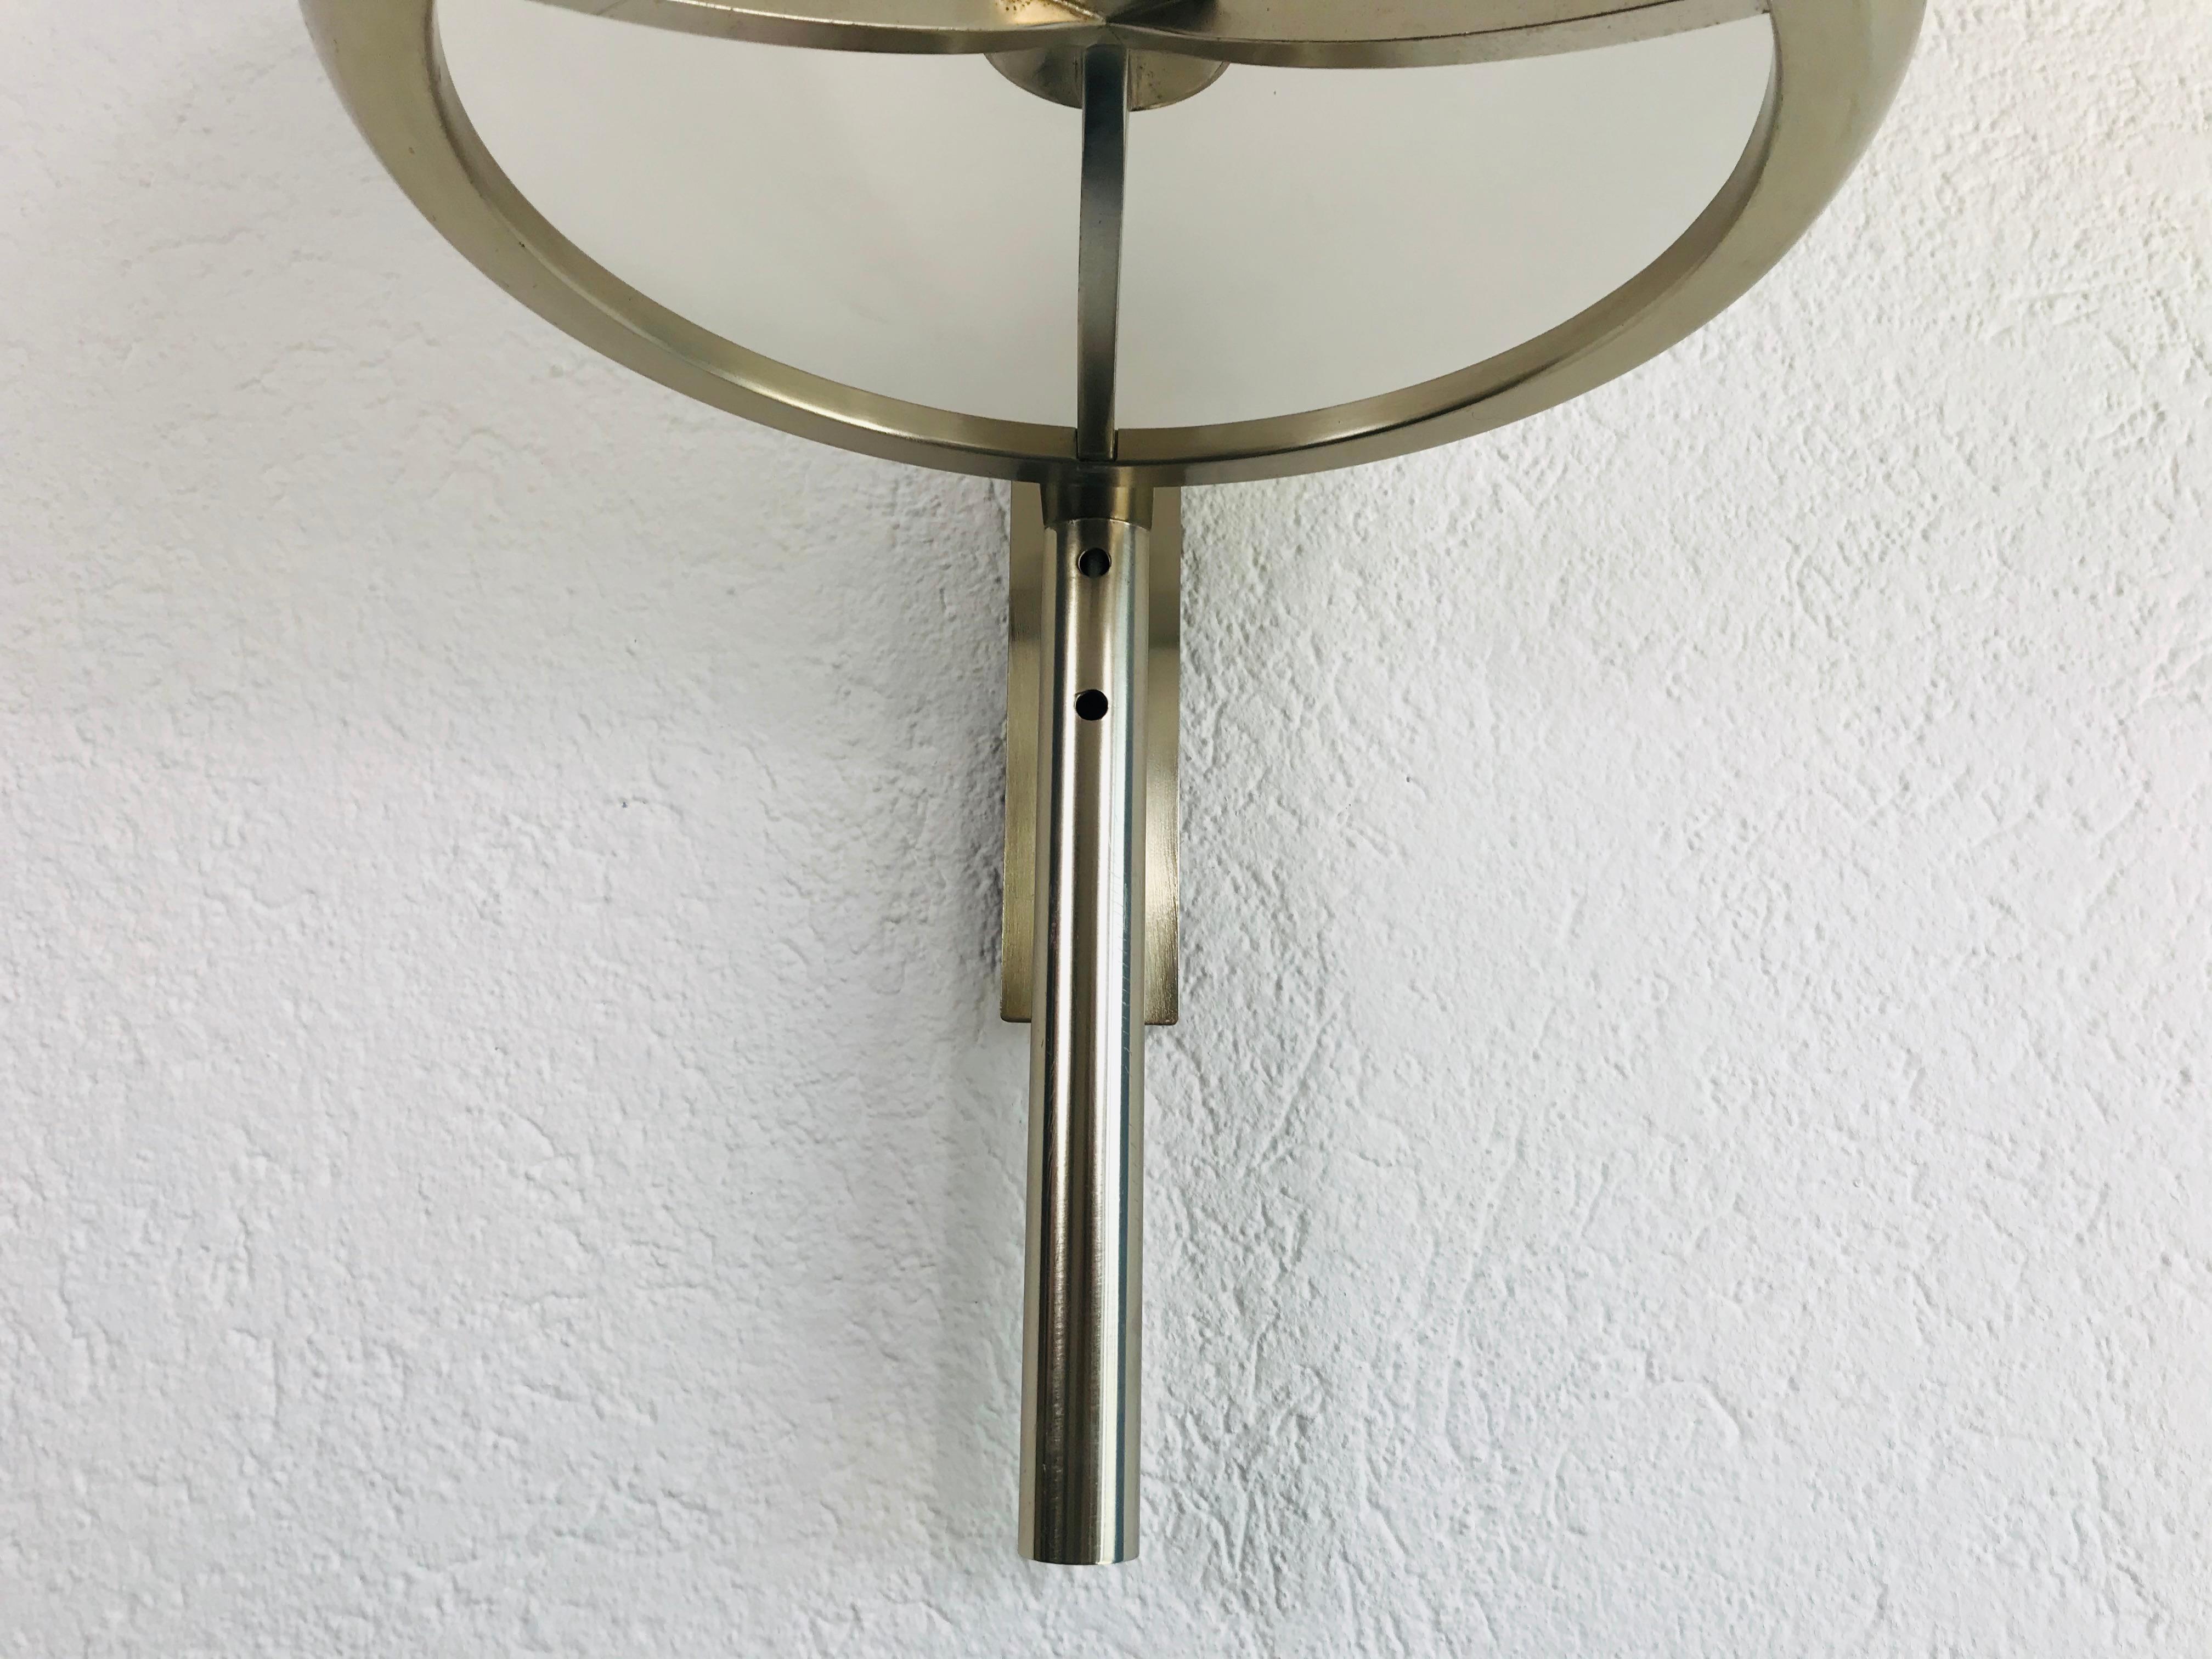 Aluminum Rare Arteluce Chrome and Perspex Wall Lamp, Italy, 1970s For Sale